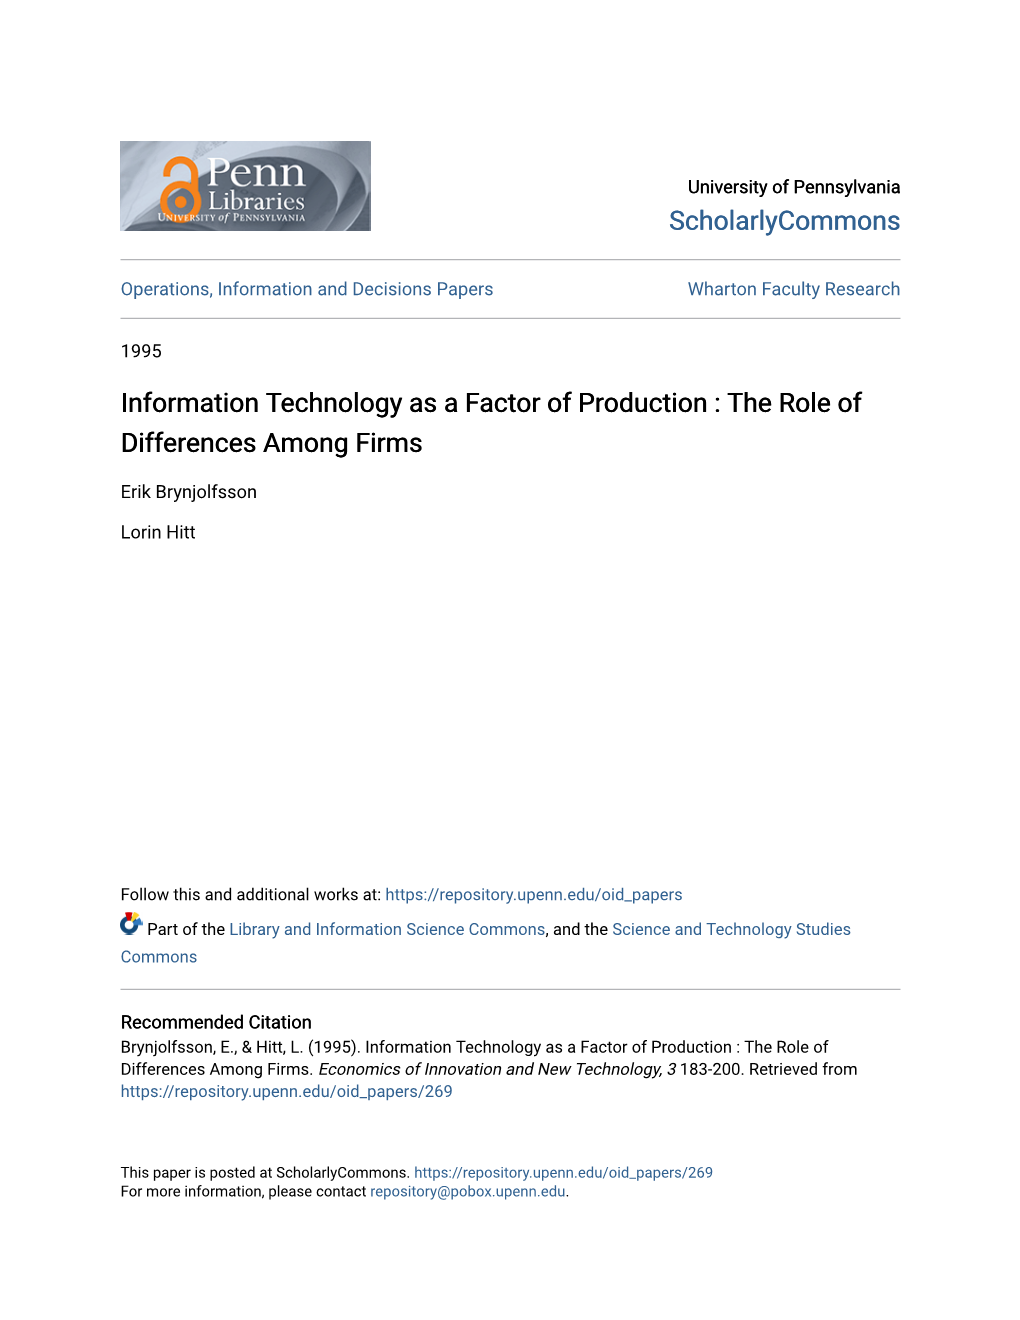 Information Technology As a Factor of Production : the Role of Differences Among Firms